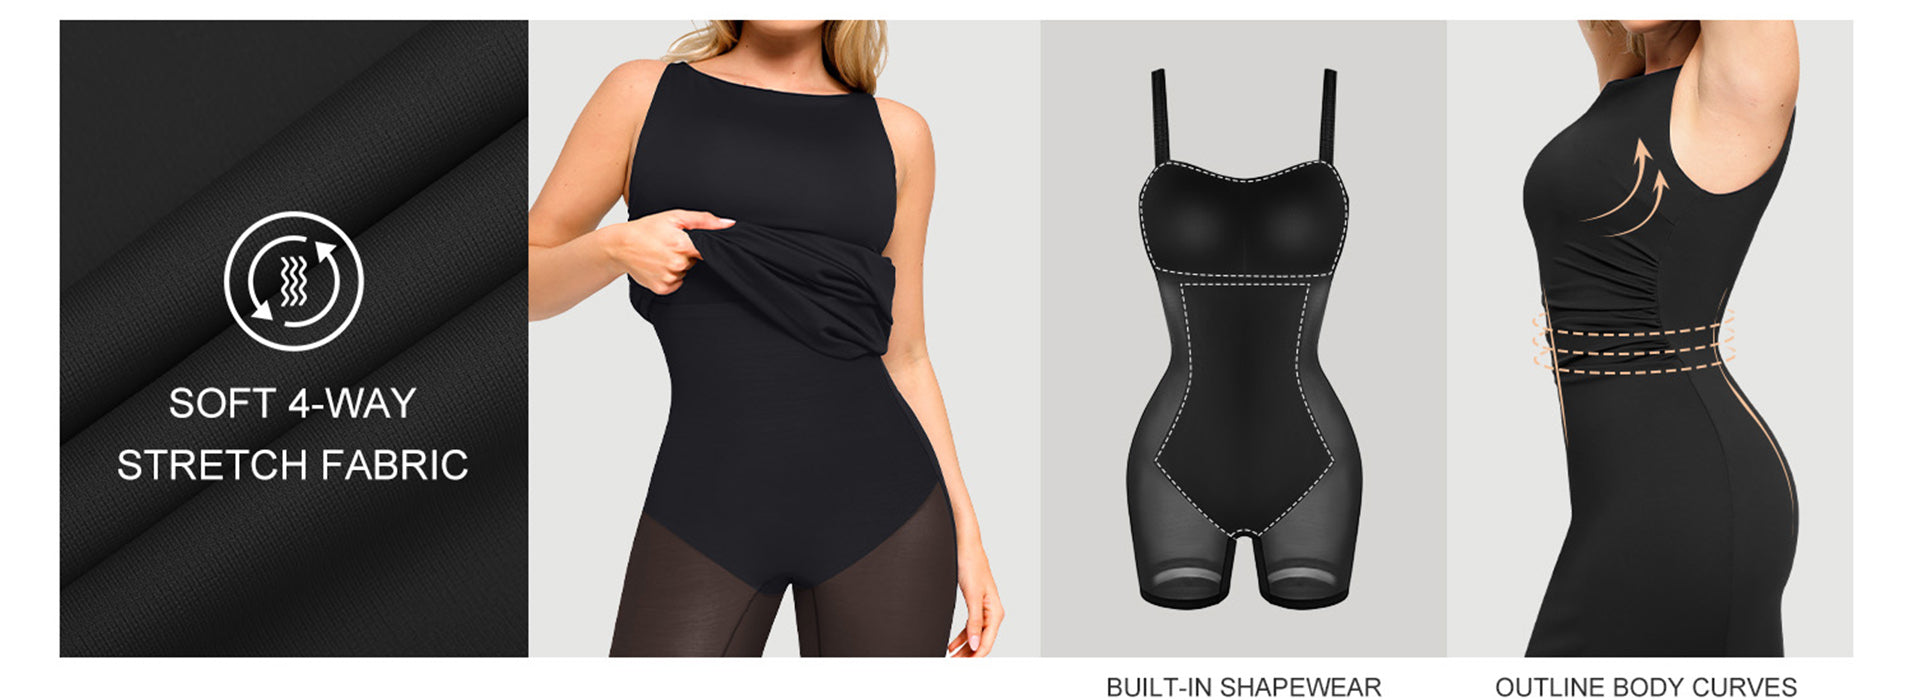 Our shapewear dresses will have you feeling conifdent all night